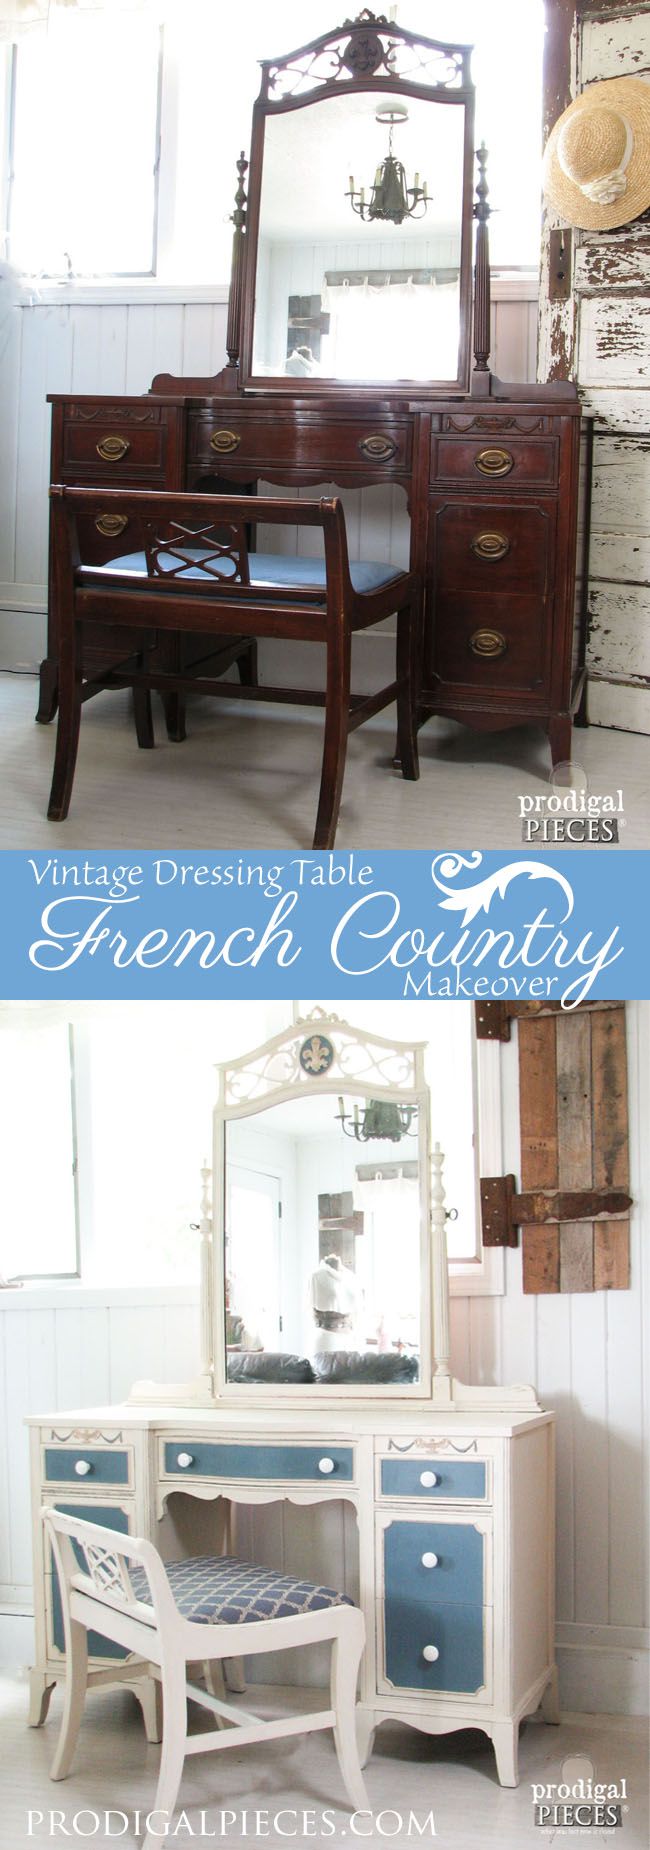 Vintage Dressing Table French Country Makeover - Prodigal Pieces